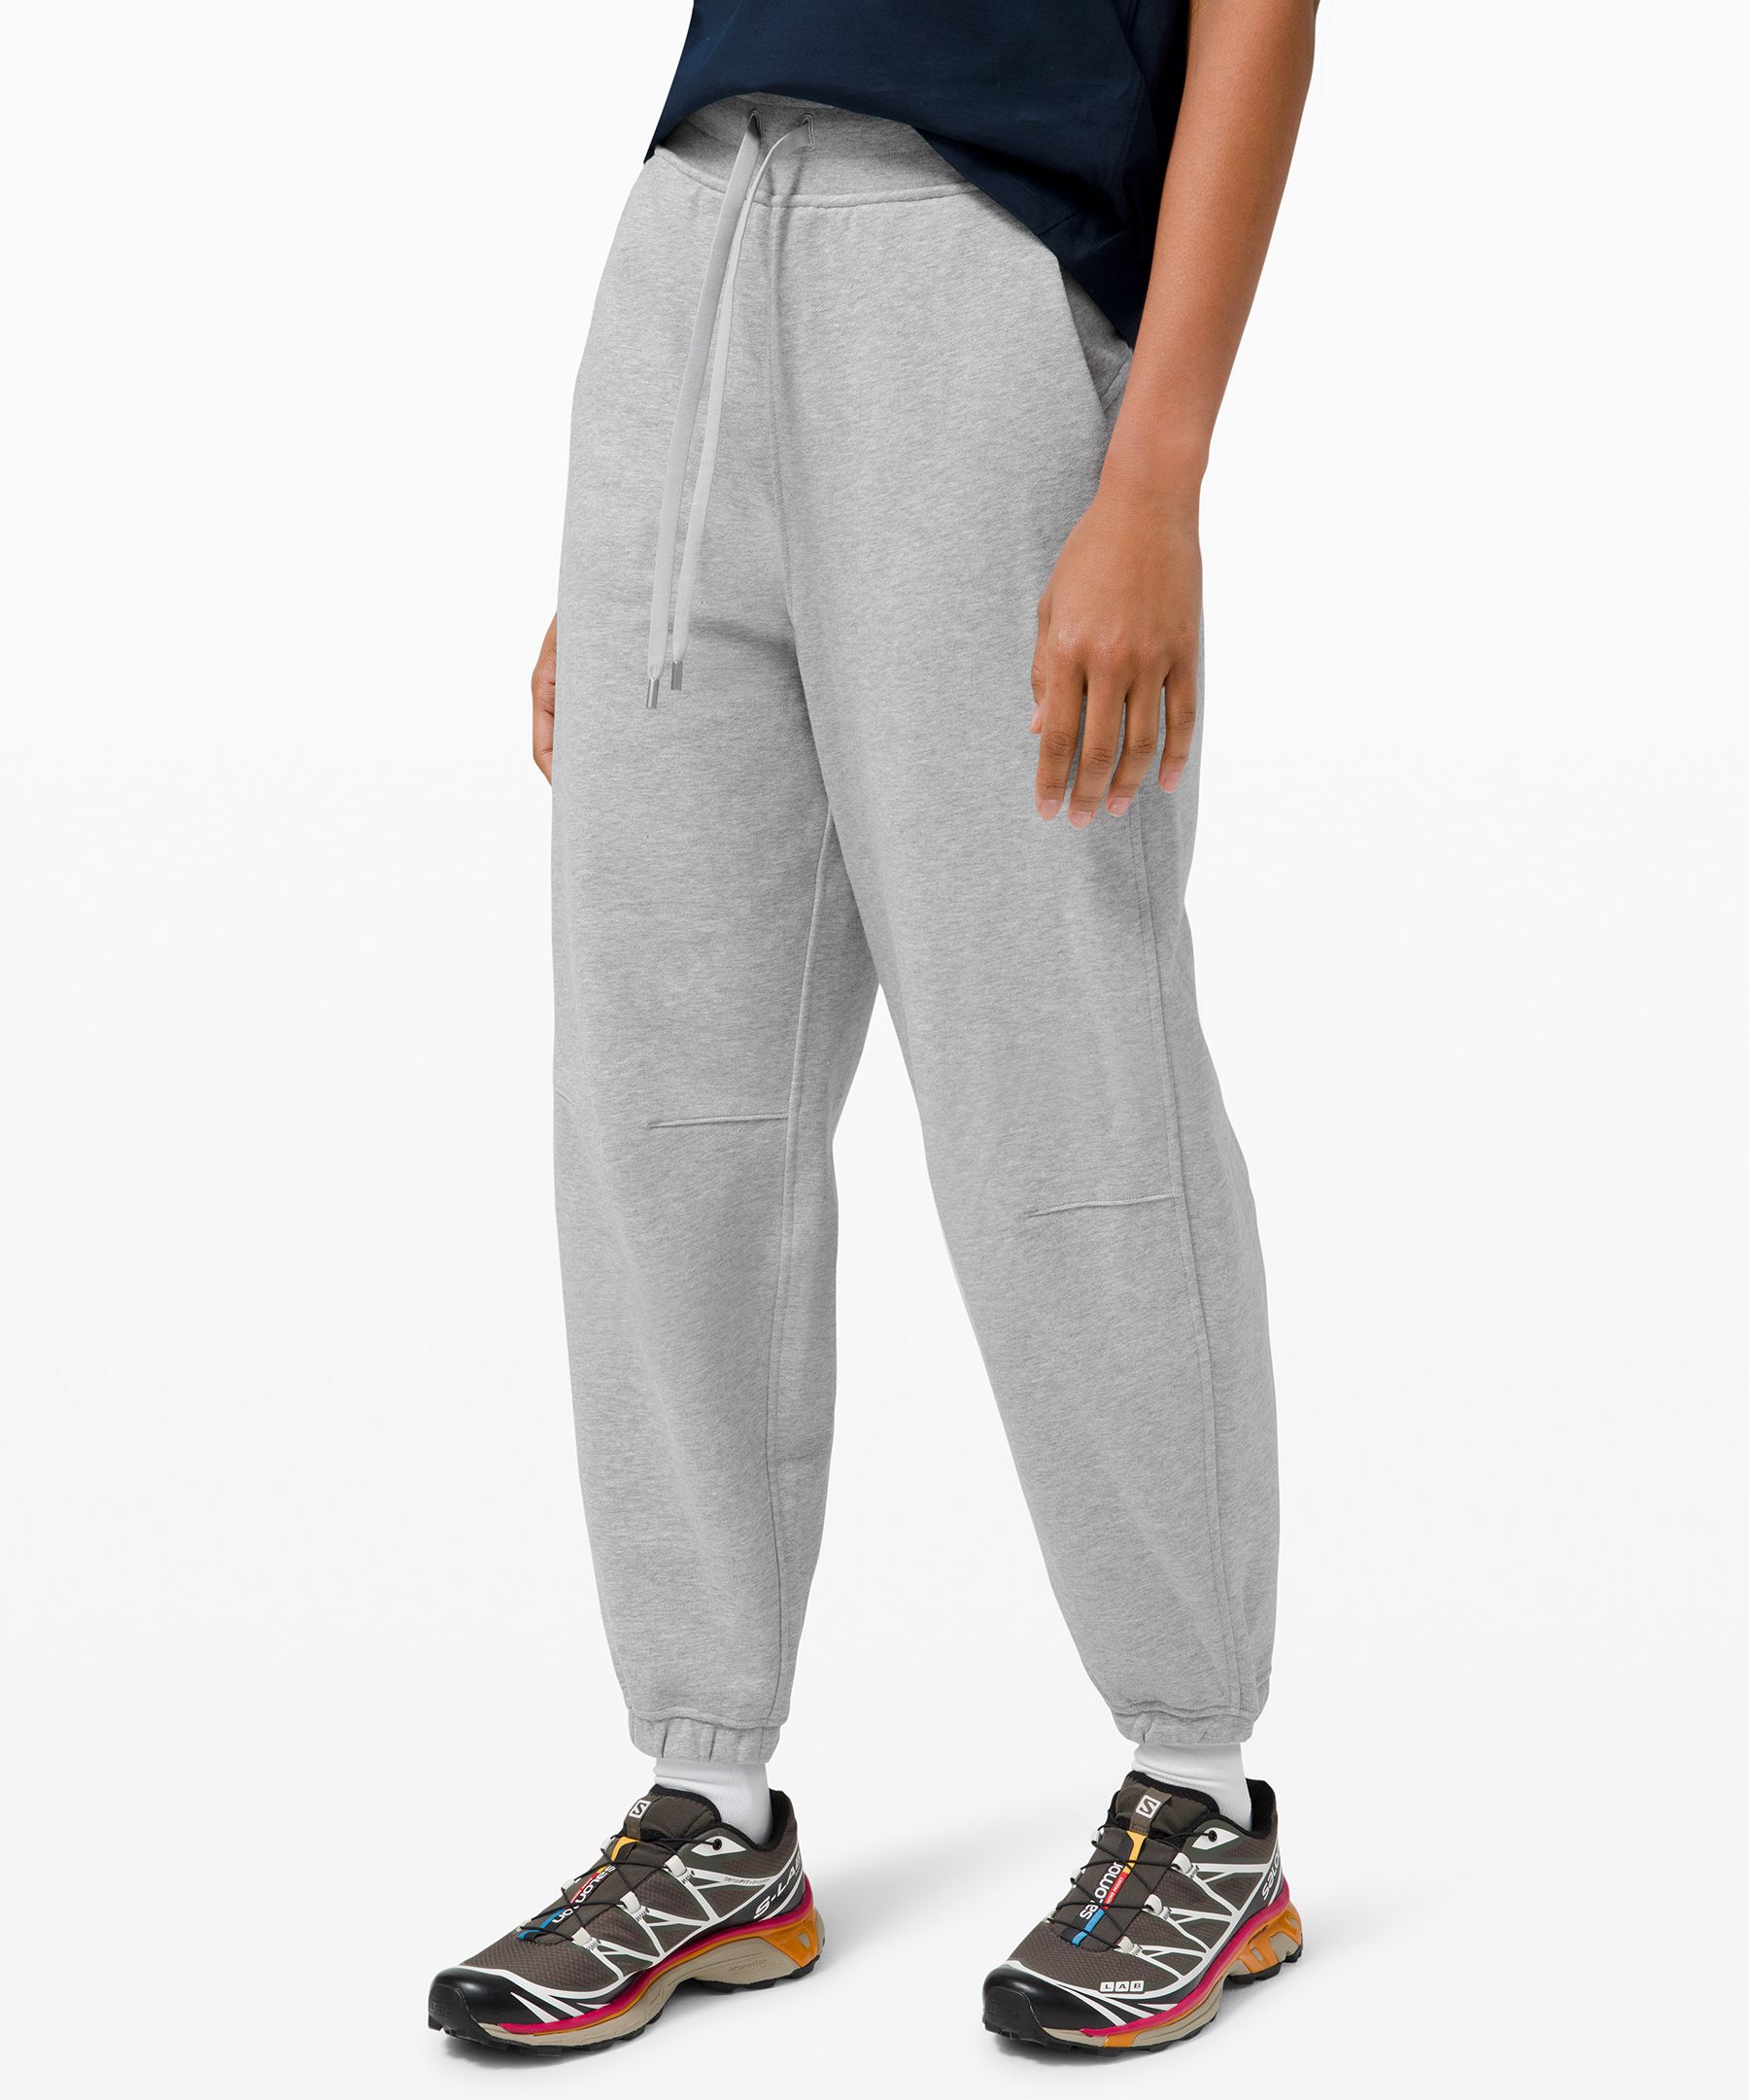 Relaxed Fit FrenchTerry Jogger | lululemon Hong Kong SAR